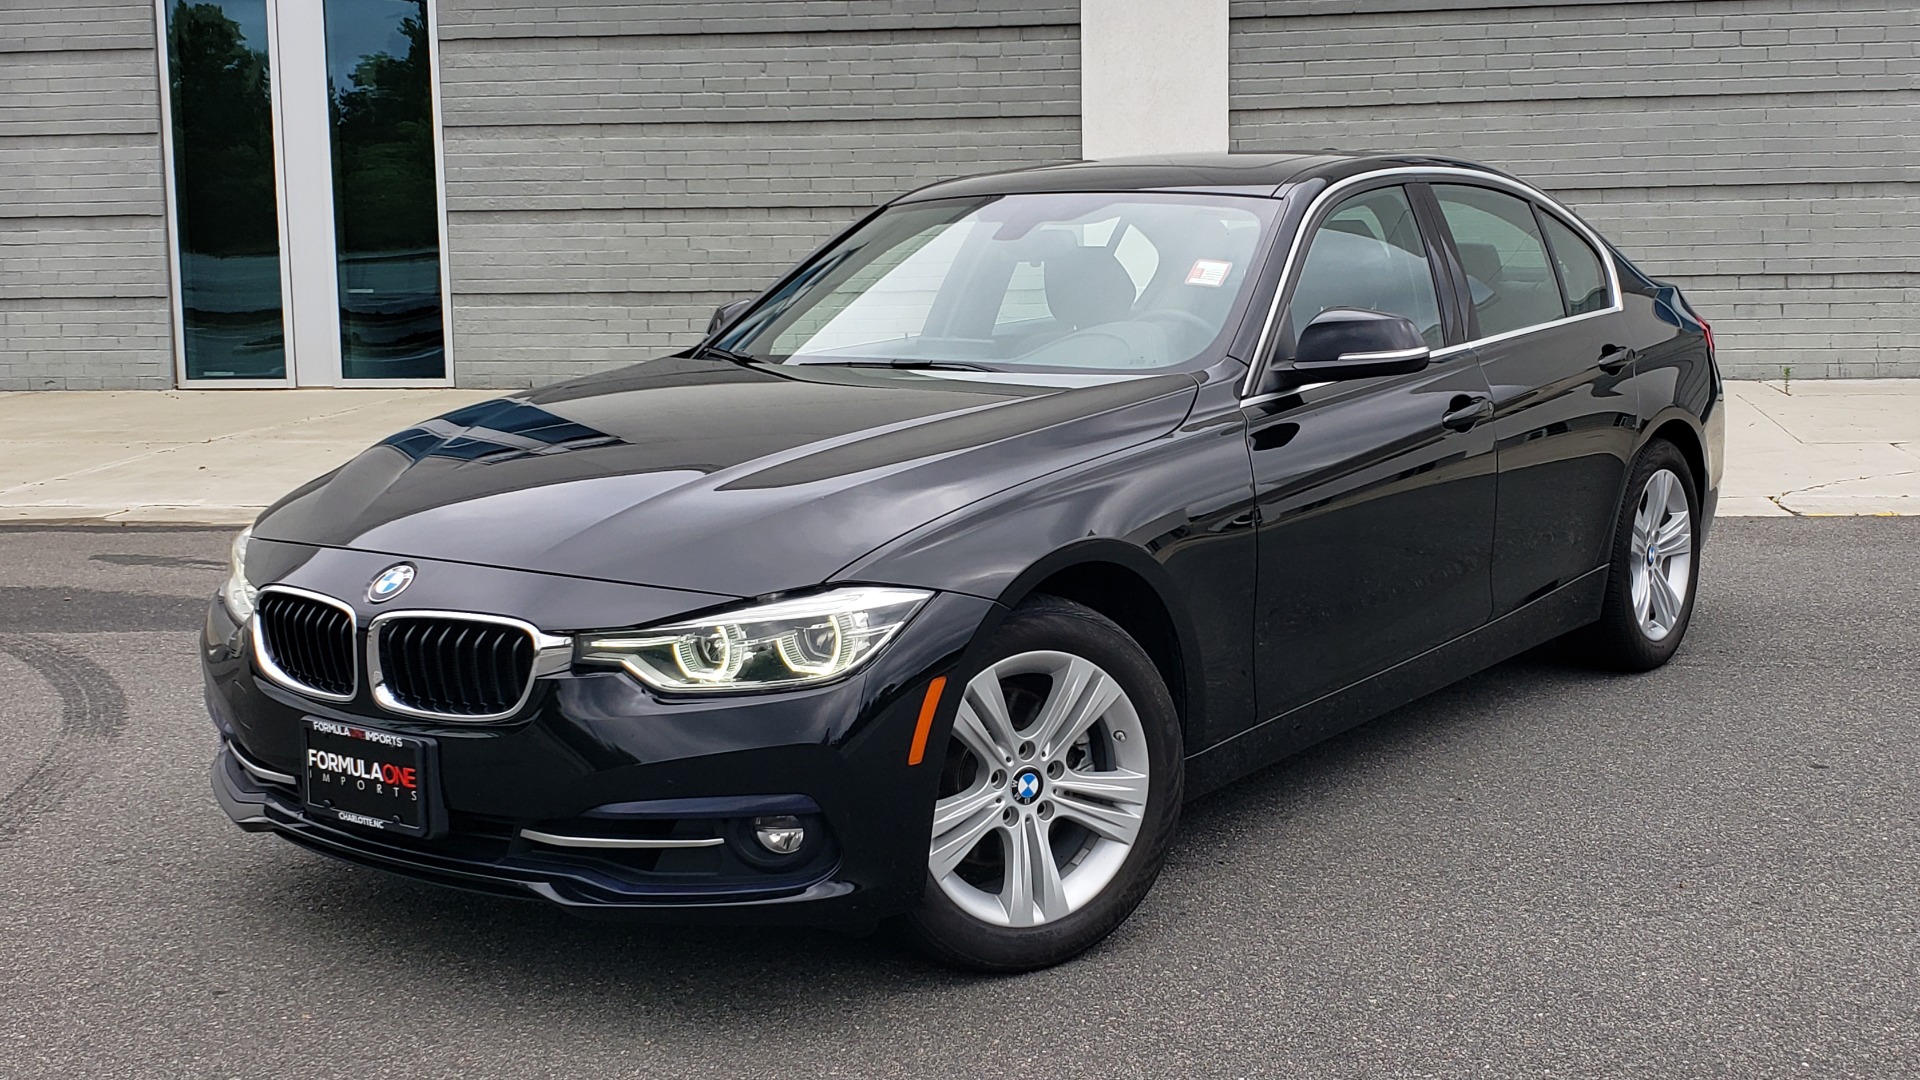 Used 2018 BMW 3 SERIES 330IXDRIVE / CONV PKG / NAV / SUNROOF / HTD STS / REARVIEW for sale Sold at Formula Imports in Charlotte NC 28227 1